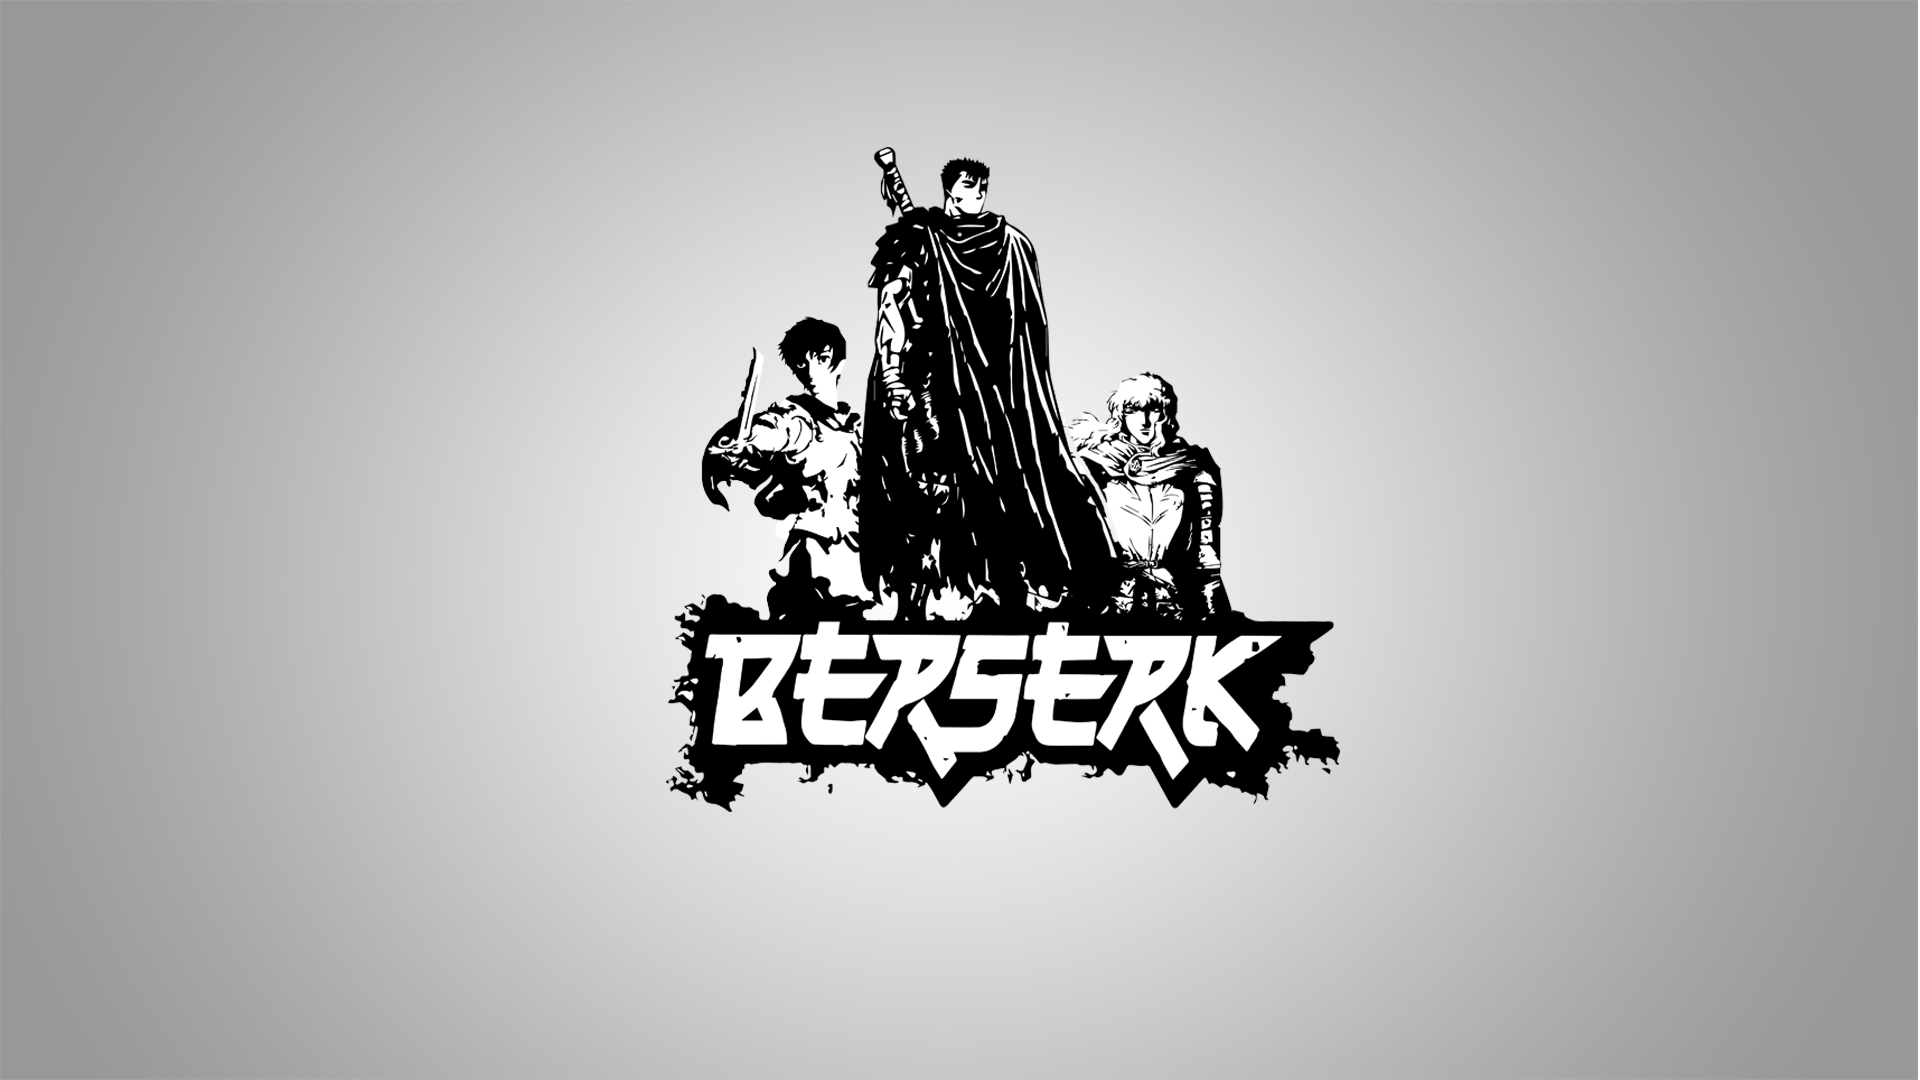 440+ Anime Berserk HD Wallpapers and Backgrounds